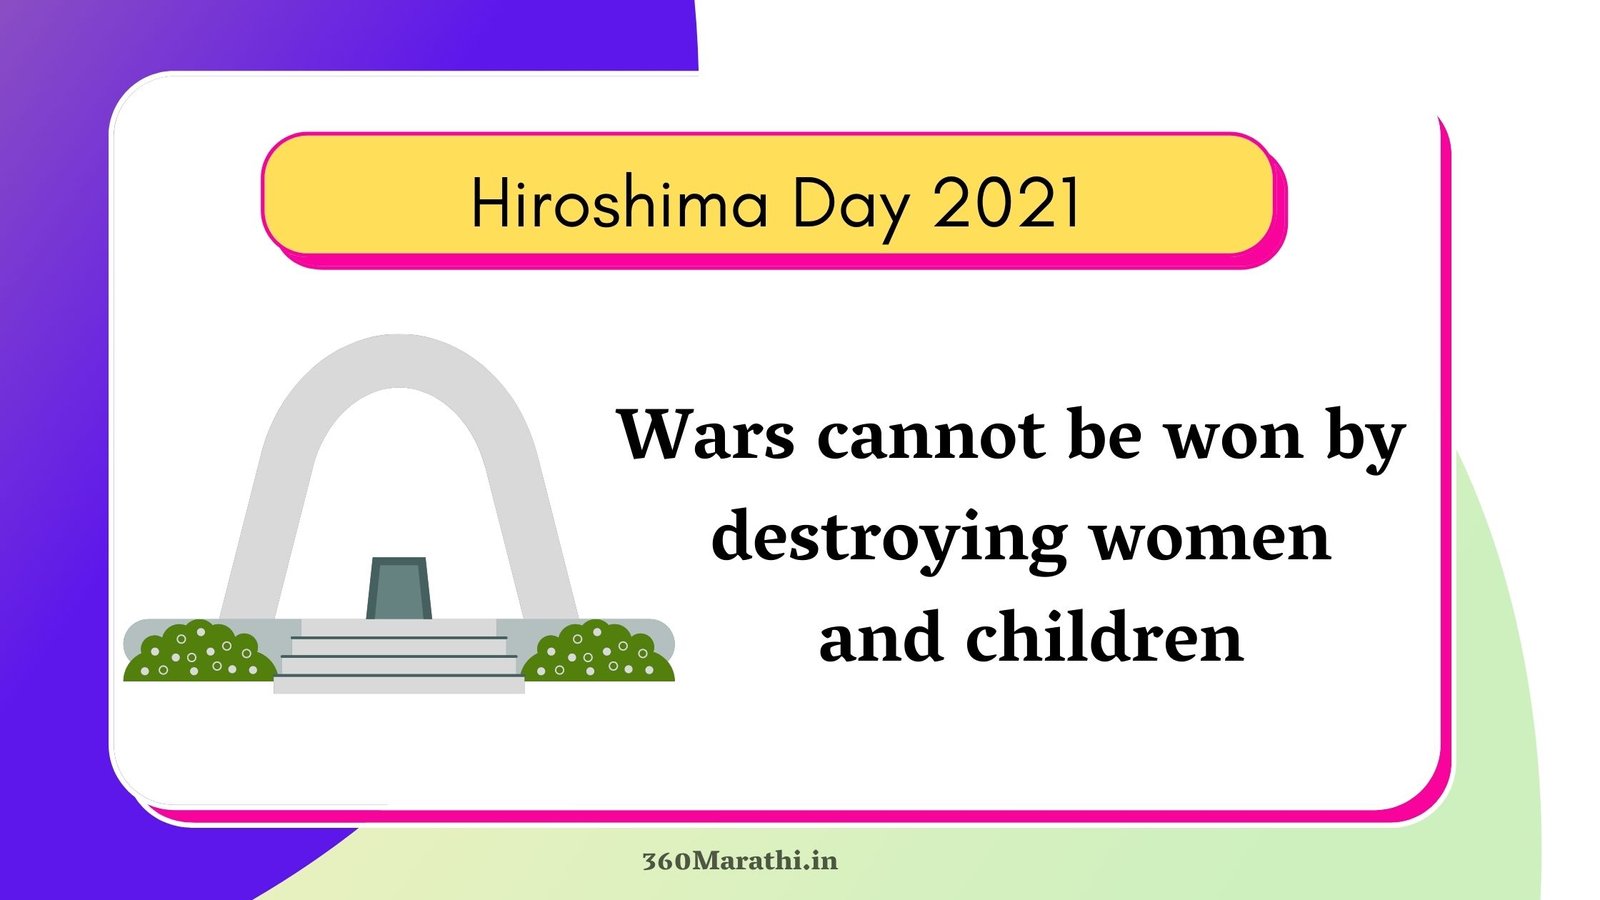 Hiroshima Day 2021 Quotes Slogans Posters Images 4 -